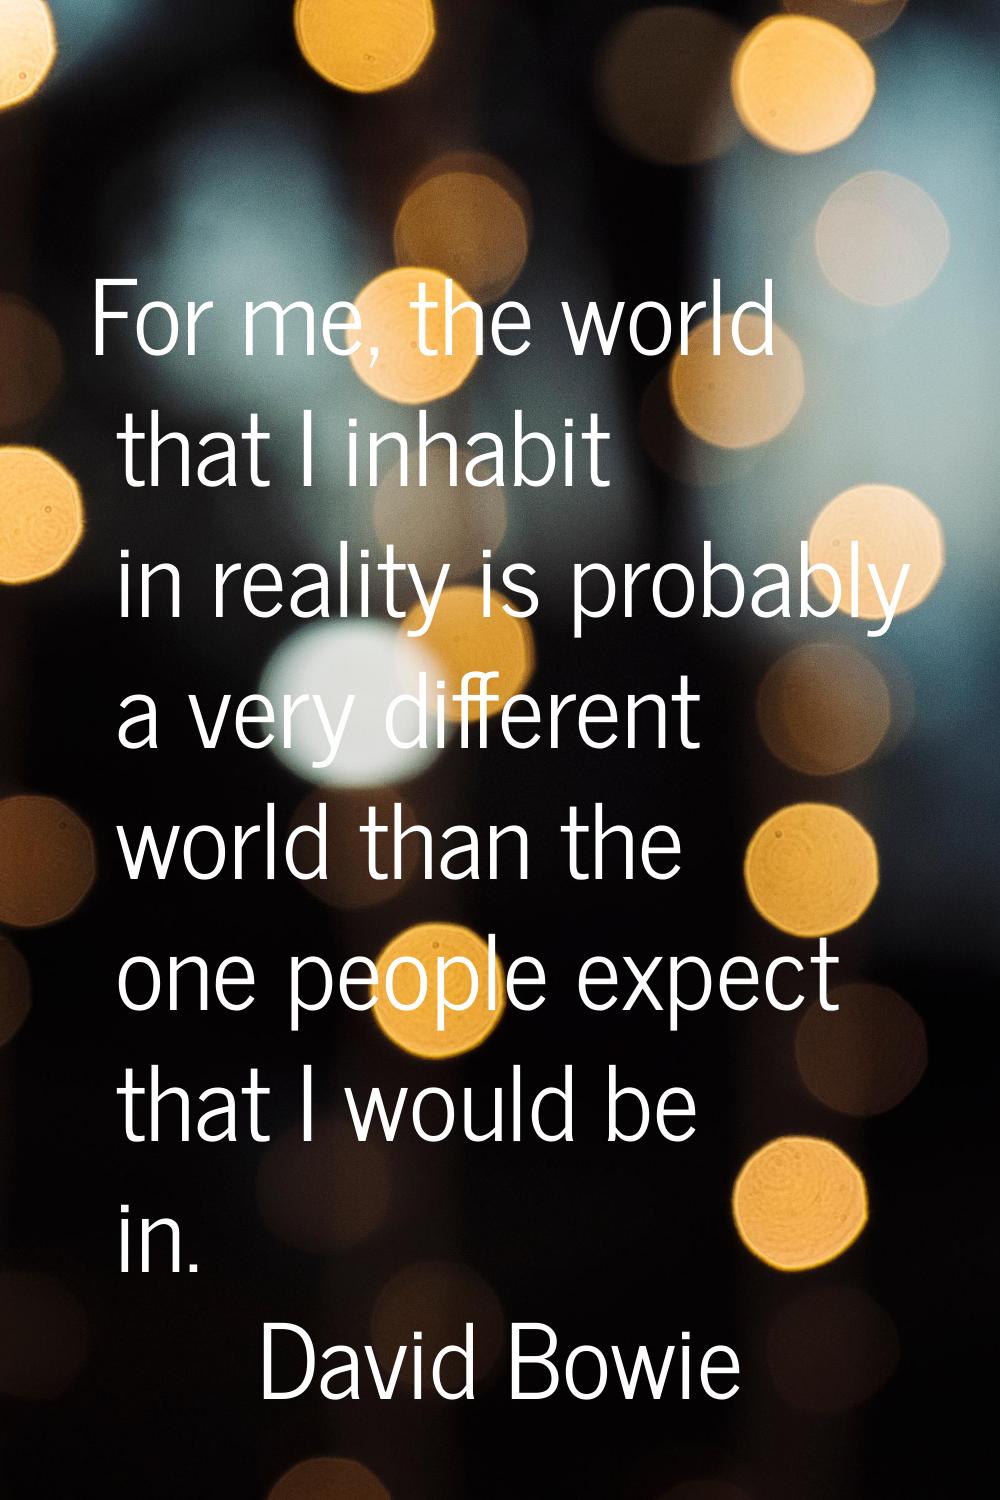 For me, the world that I inhabit in reality is probably a very different world than the one people 